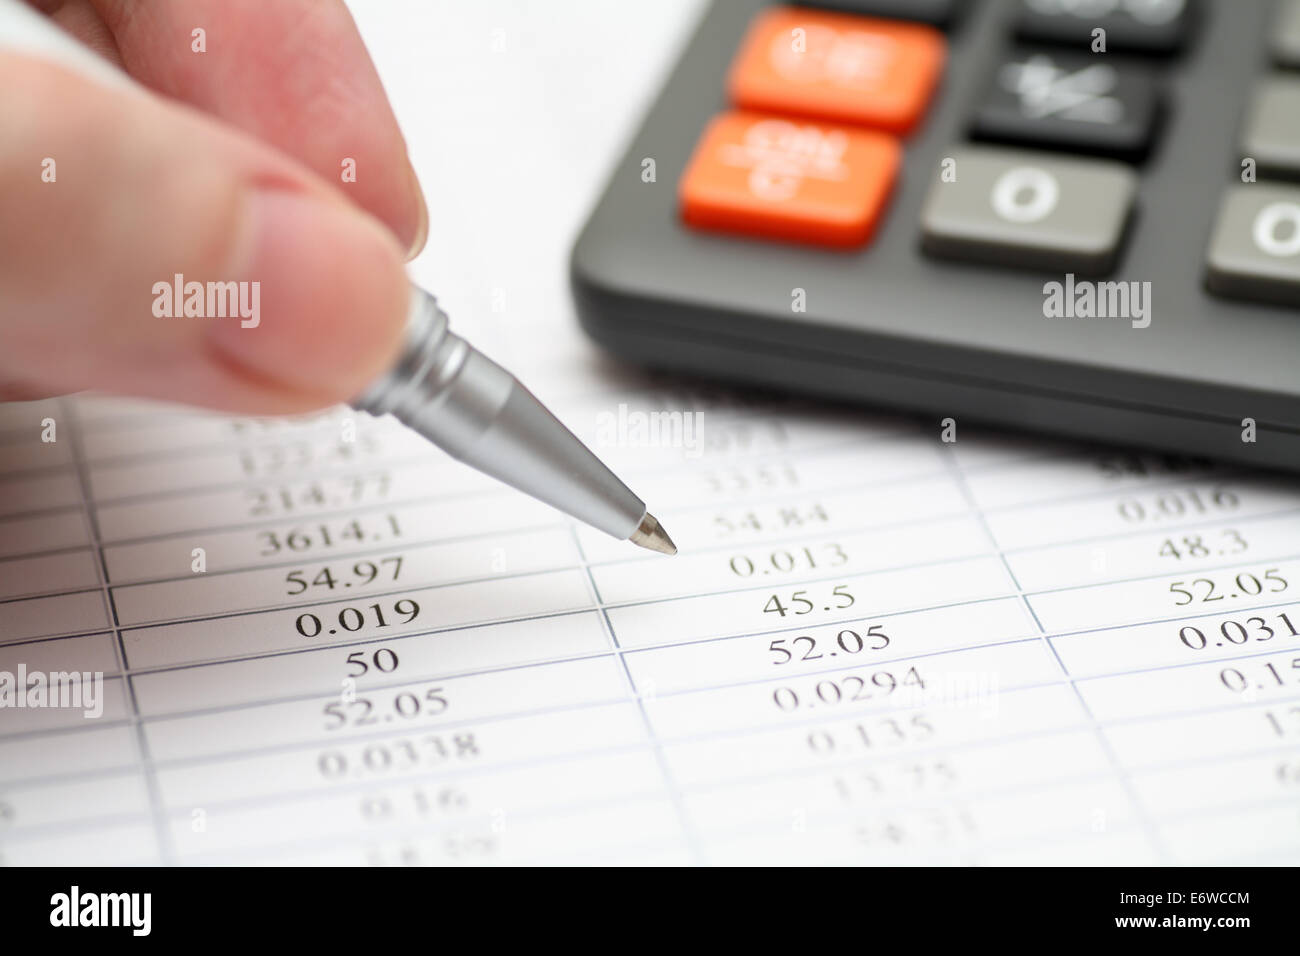 Analyzing financial statements. Focus on ballpoint pen. Shallow depth of field. Close-up. Stock Photo